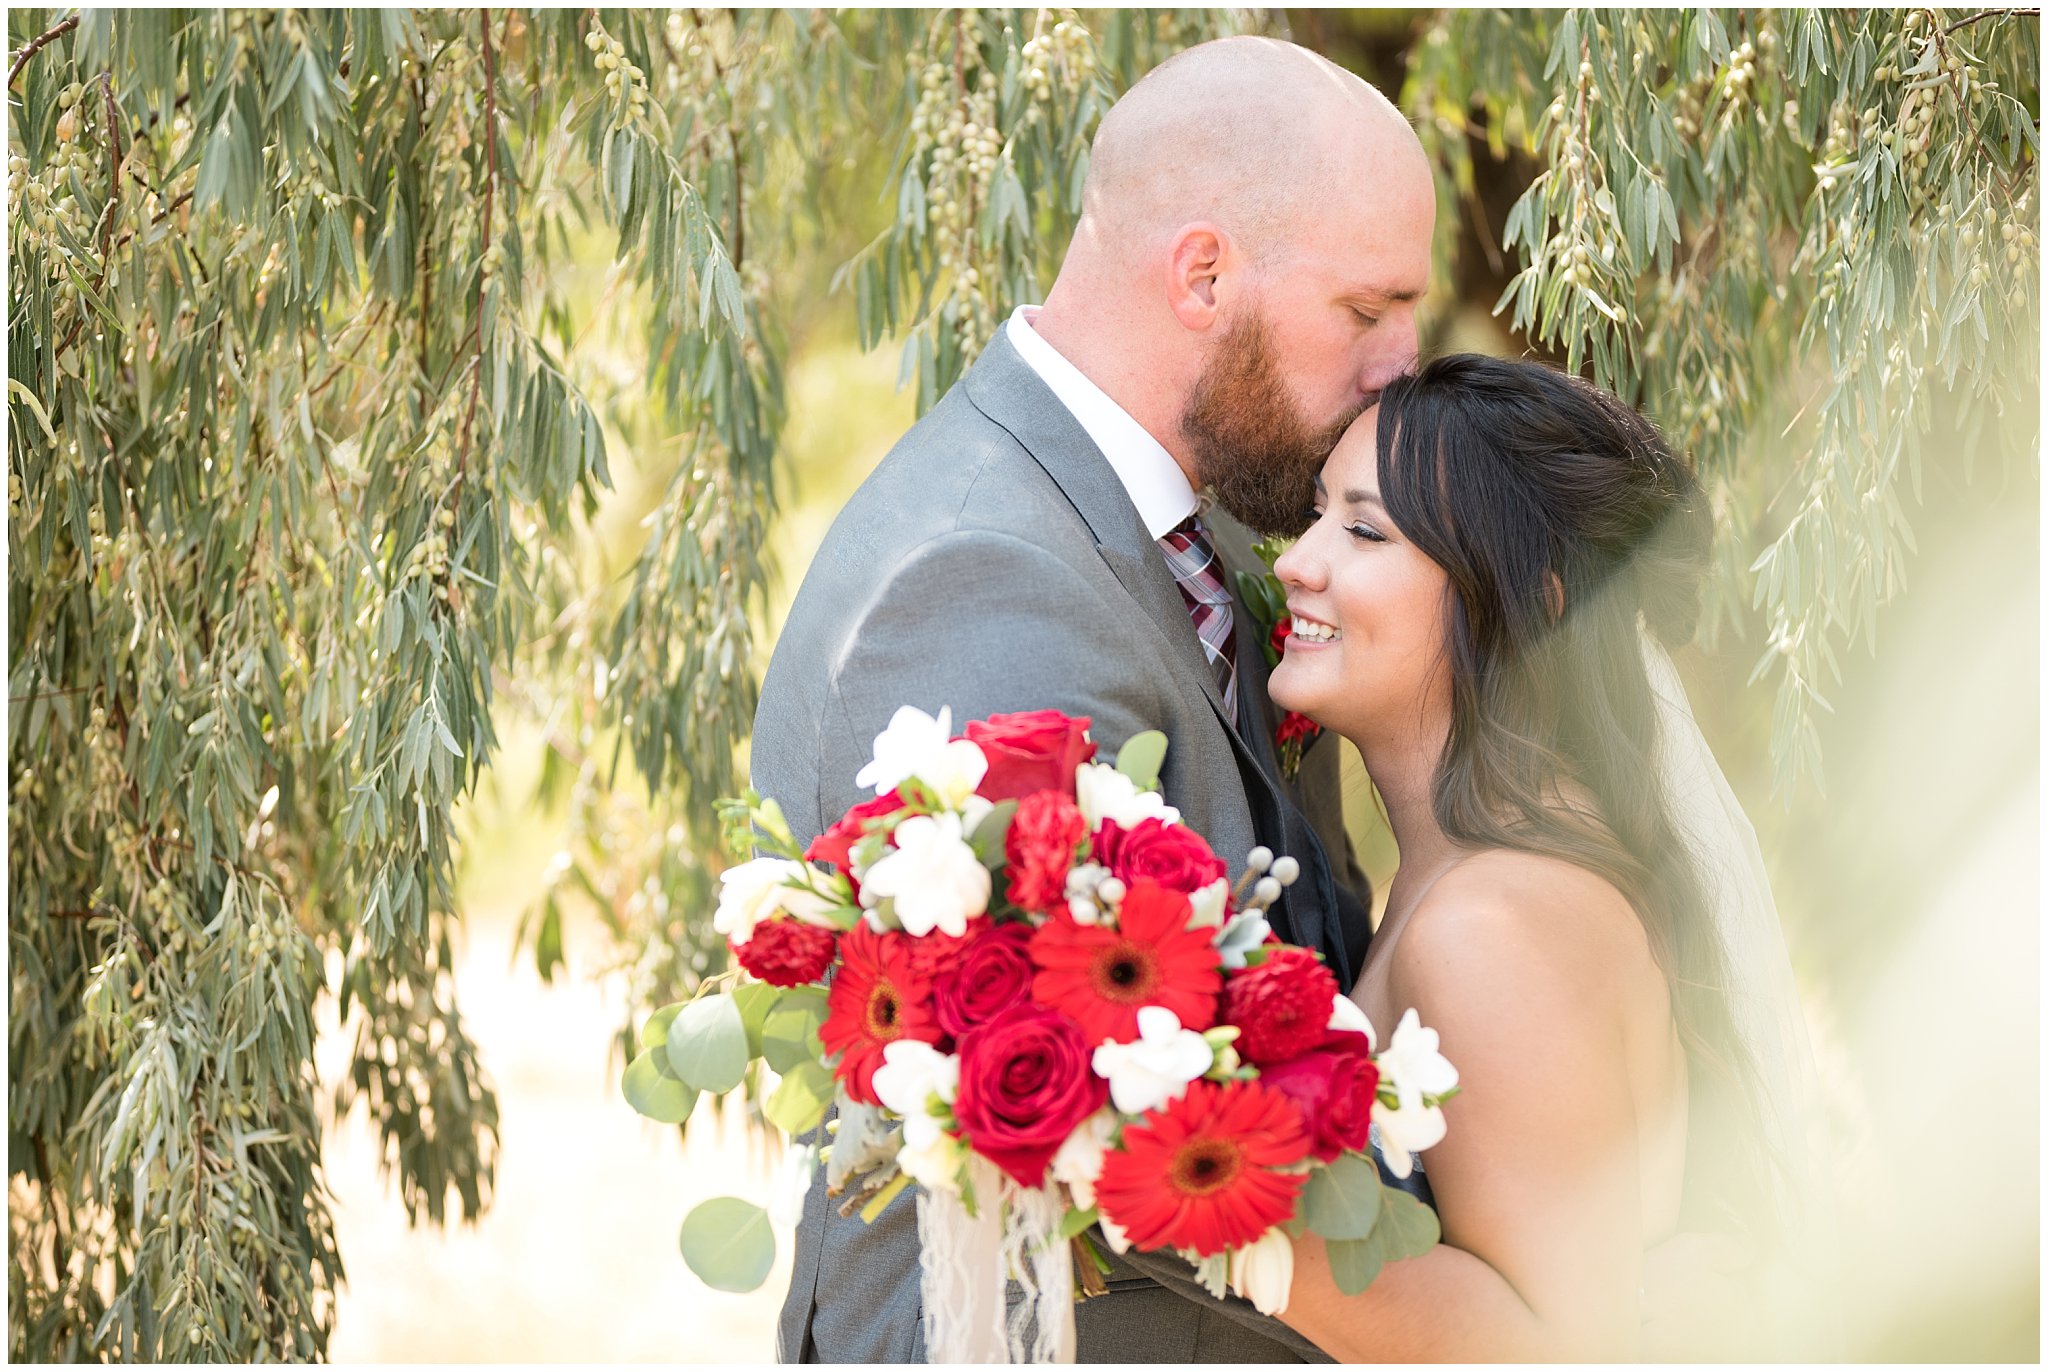 Bride candidly laughing as groom kisses her forehead | Davis County Outdoor Wedding | Jessie and Dallin Photography